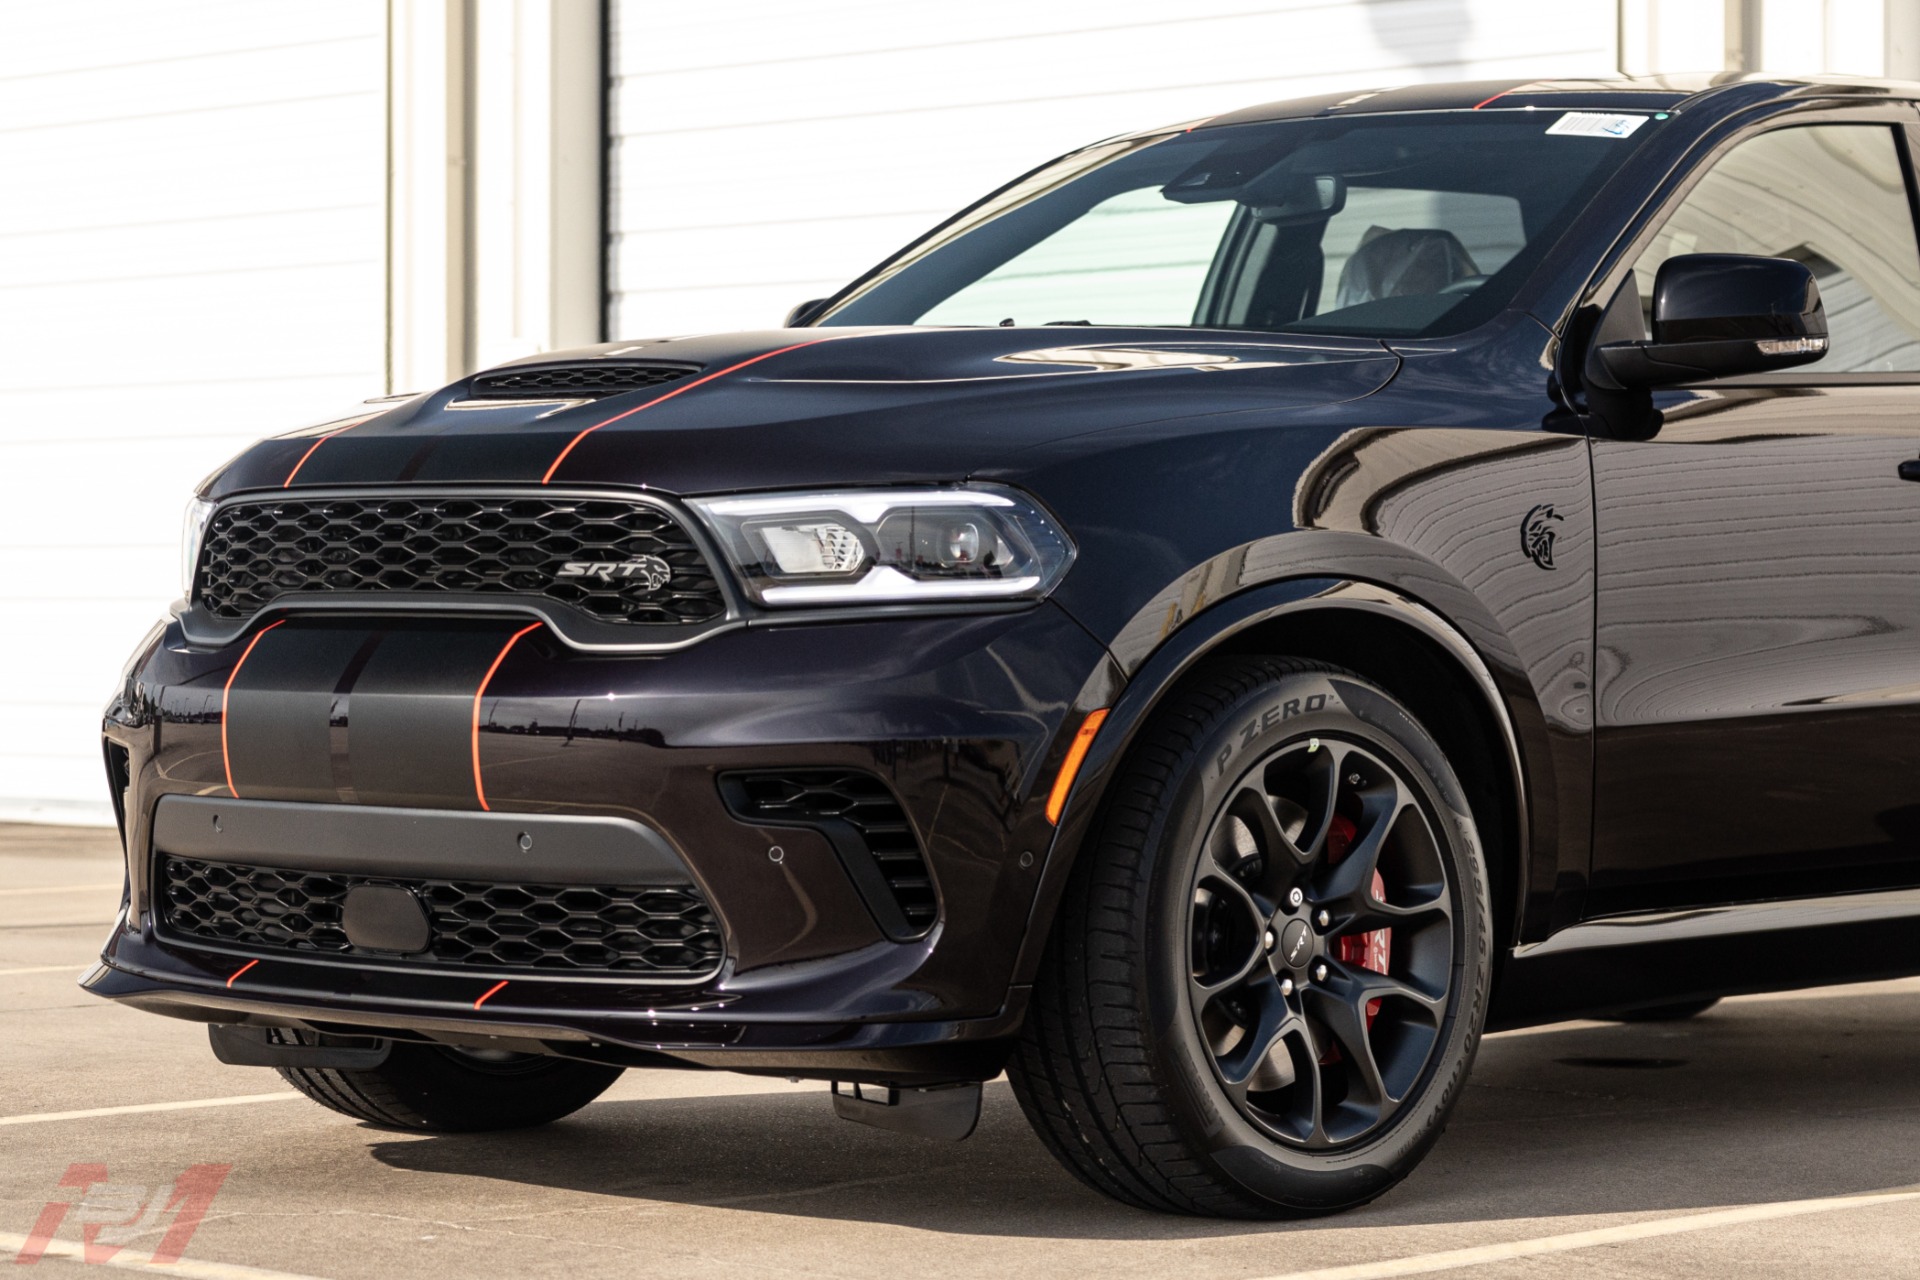 Used 2021 Dodge Durango SRT Hellcat For Sale (Special Pricing) | BJ ...